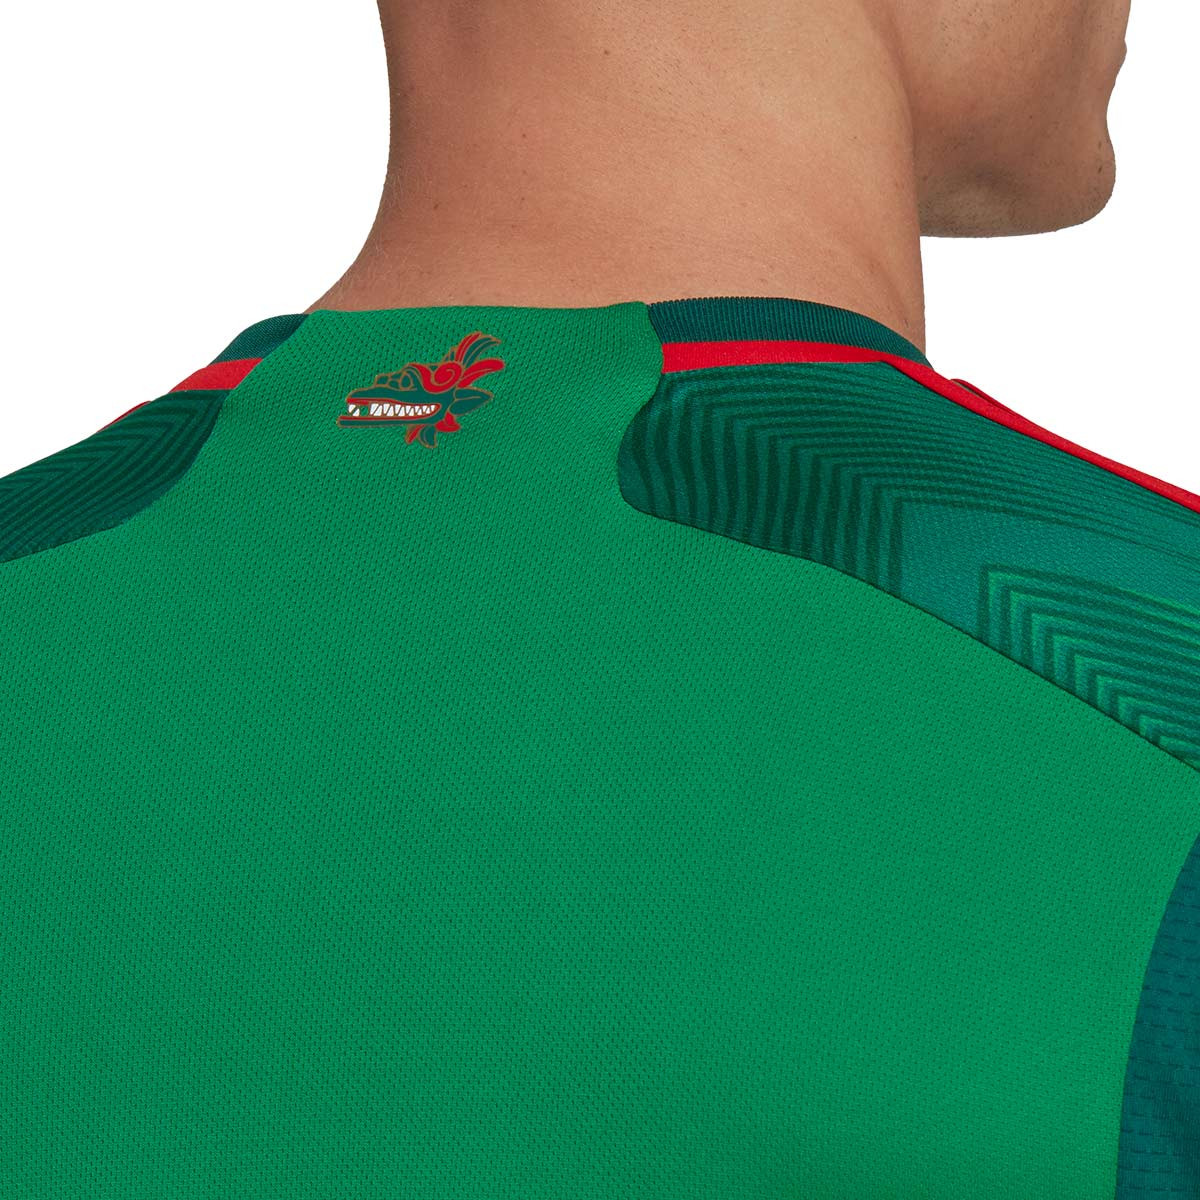 mexico jersey 2022 world cup